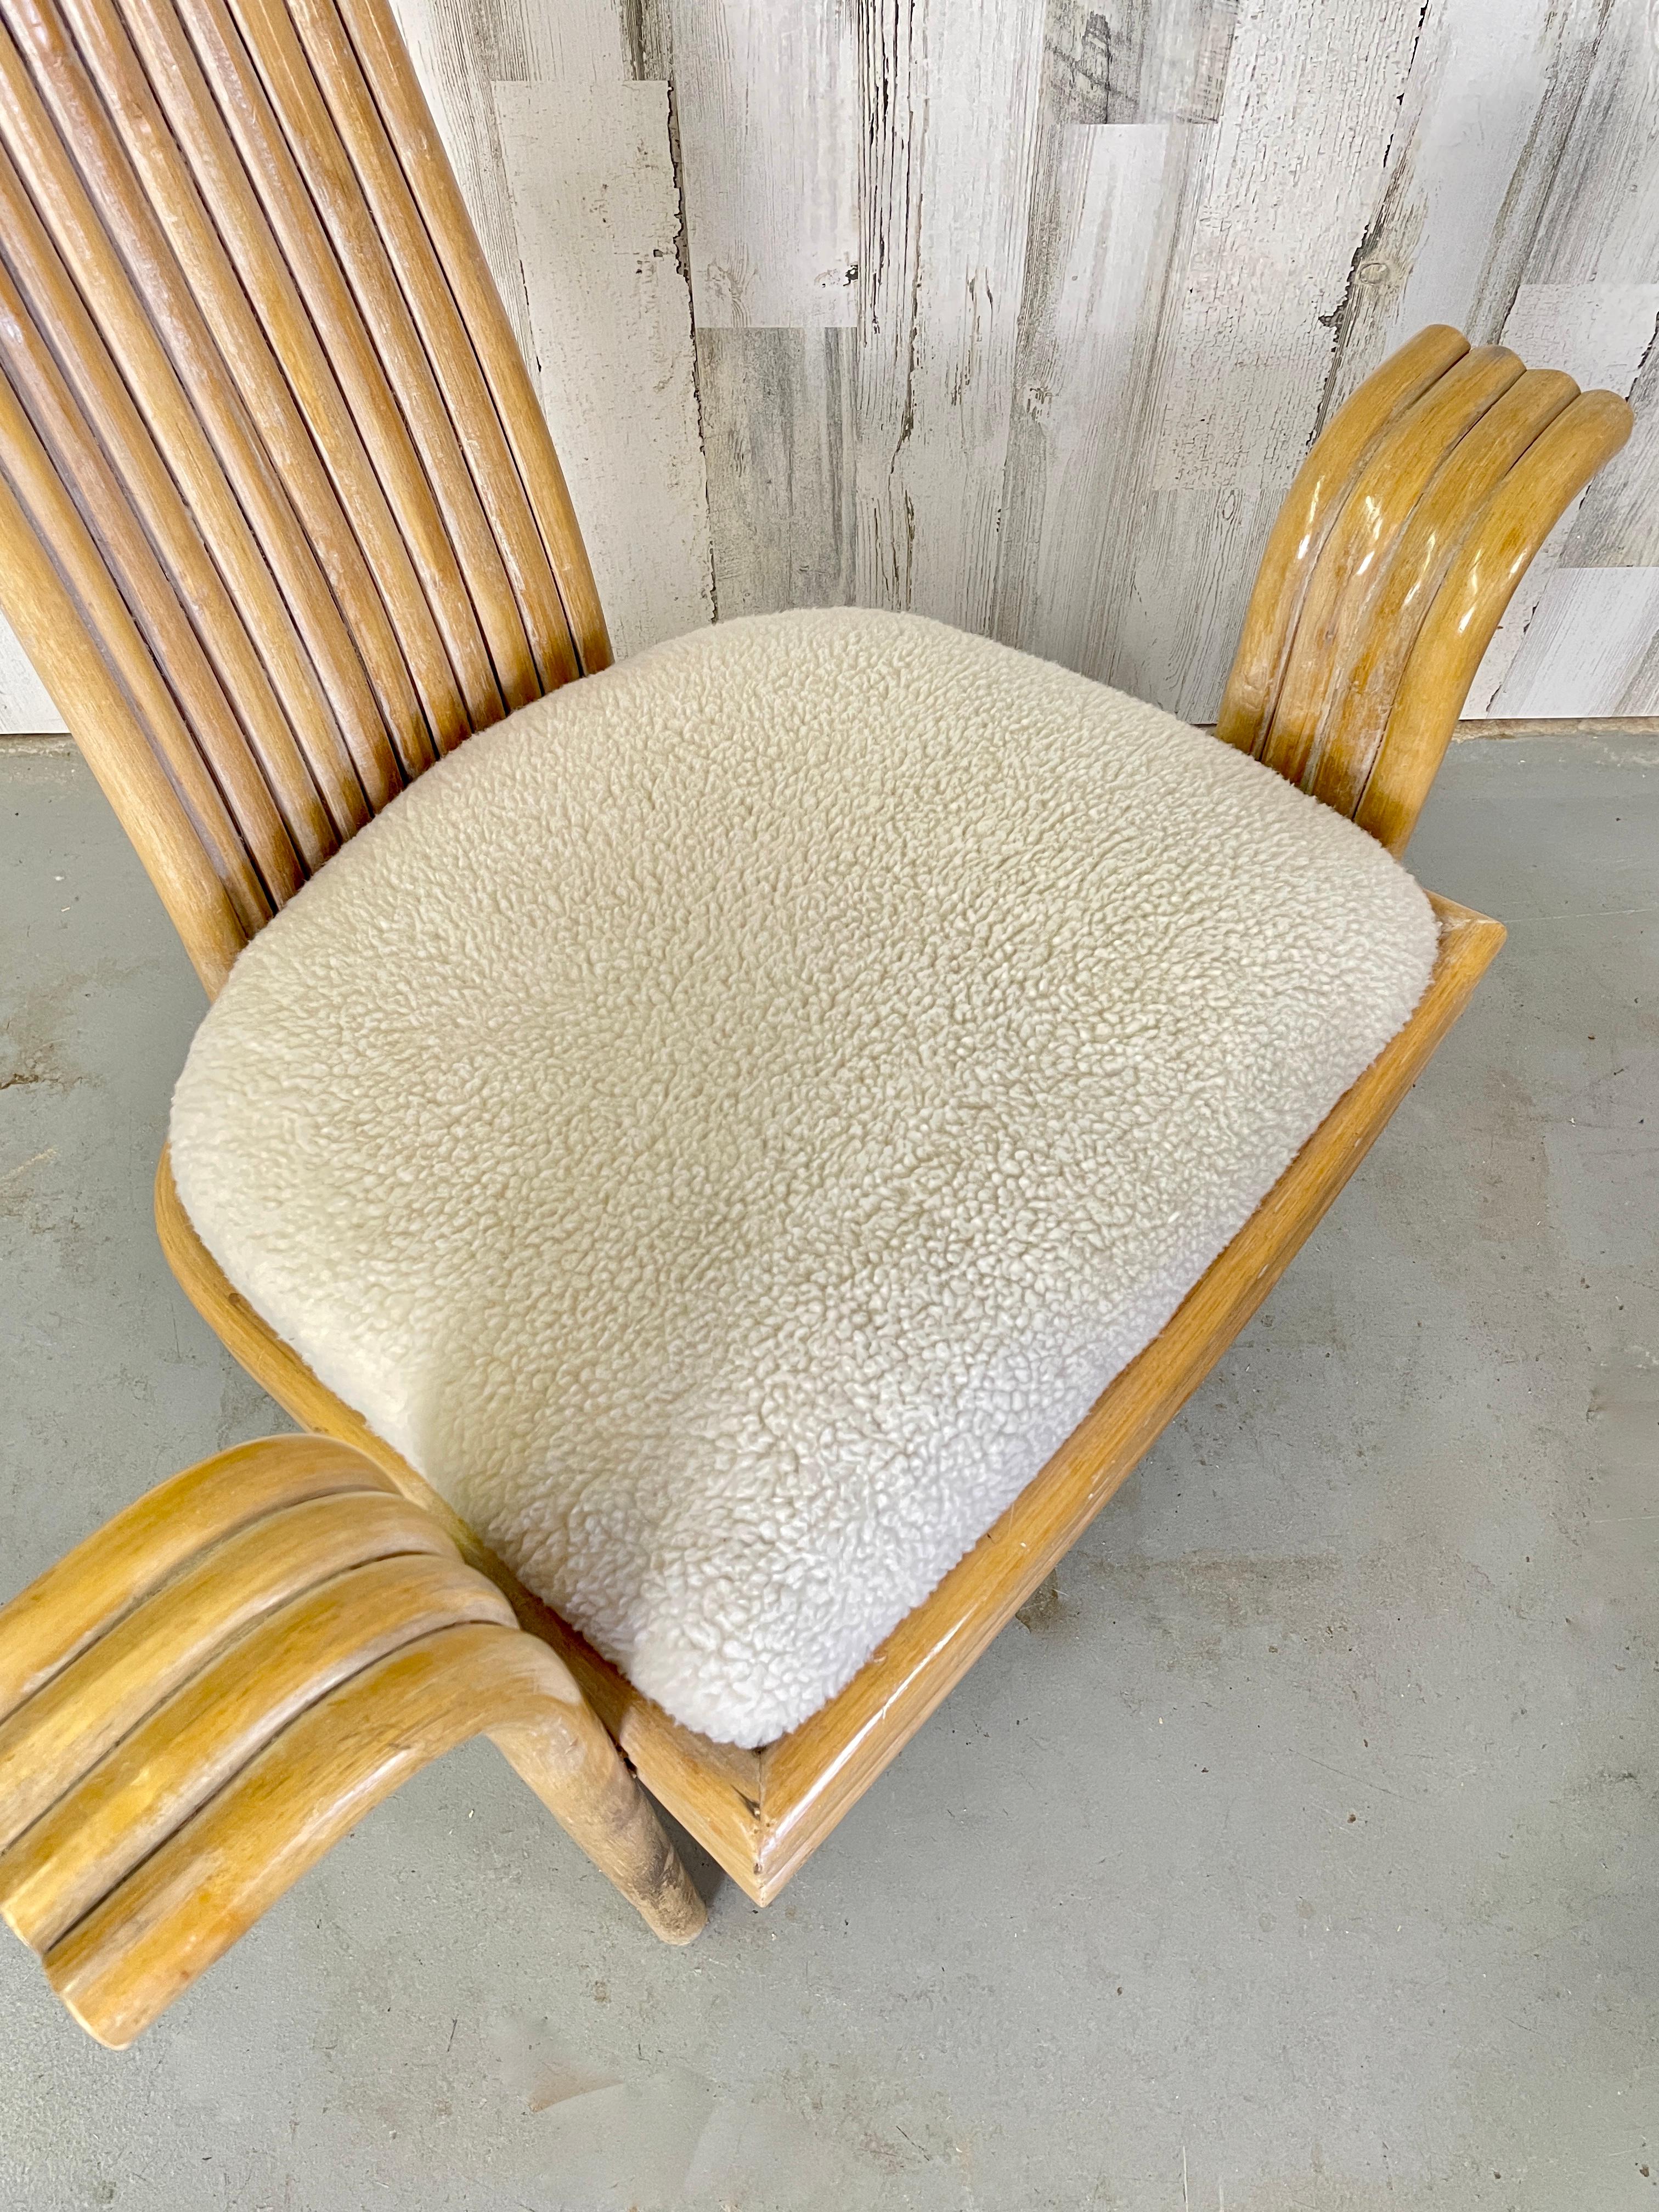 Danny Ho Fong Style Rattan Arm Chairs, A Pair In Good Condition For Sale In Denton, TX